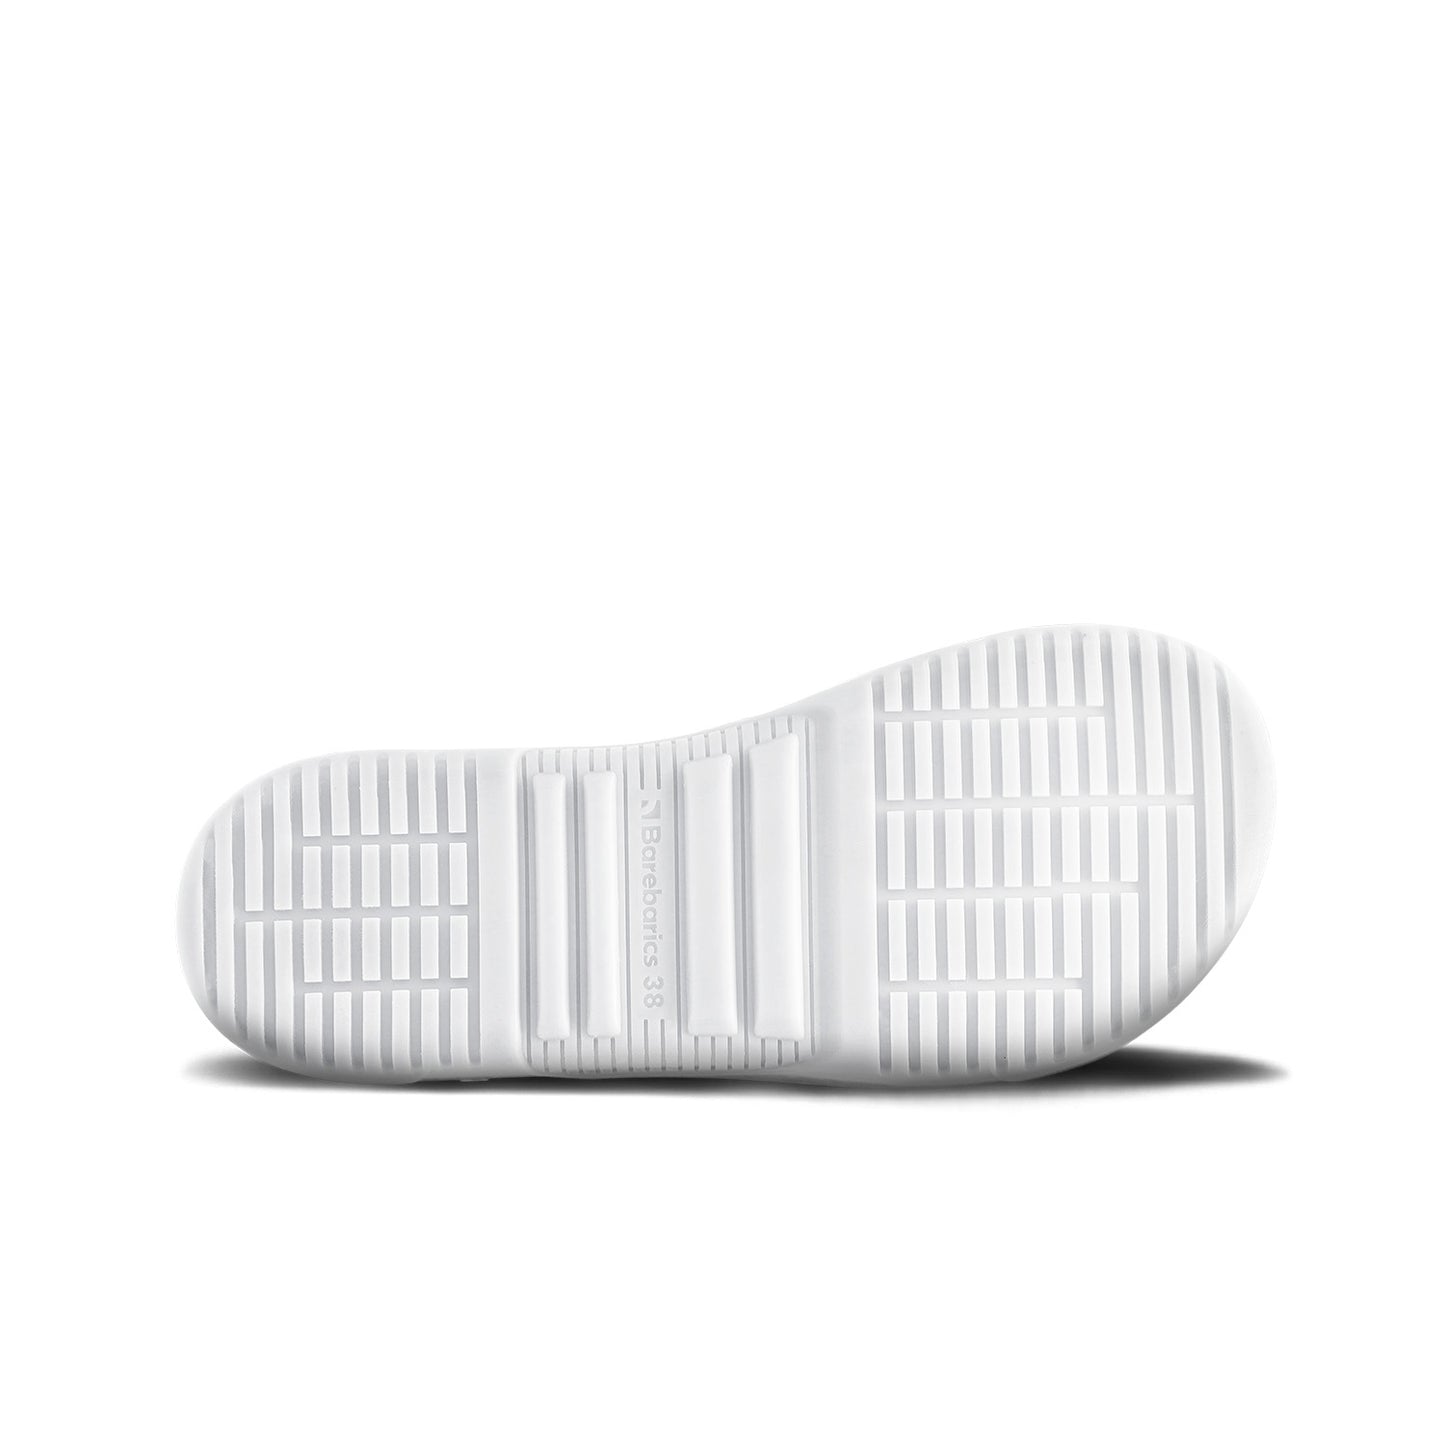 Barebarics Revive Barefoot Sneakers - White and Grey